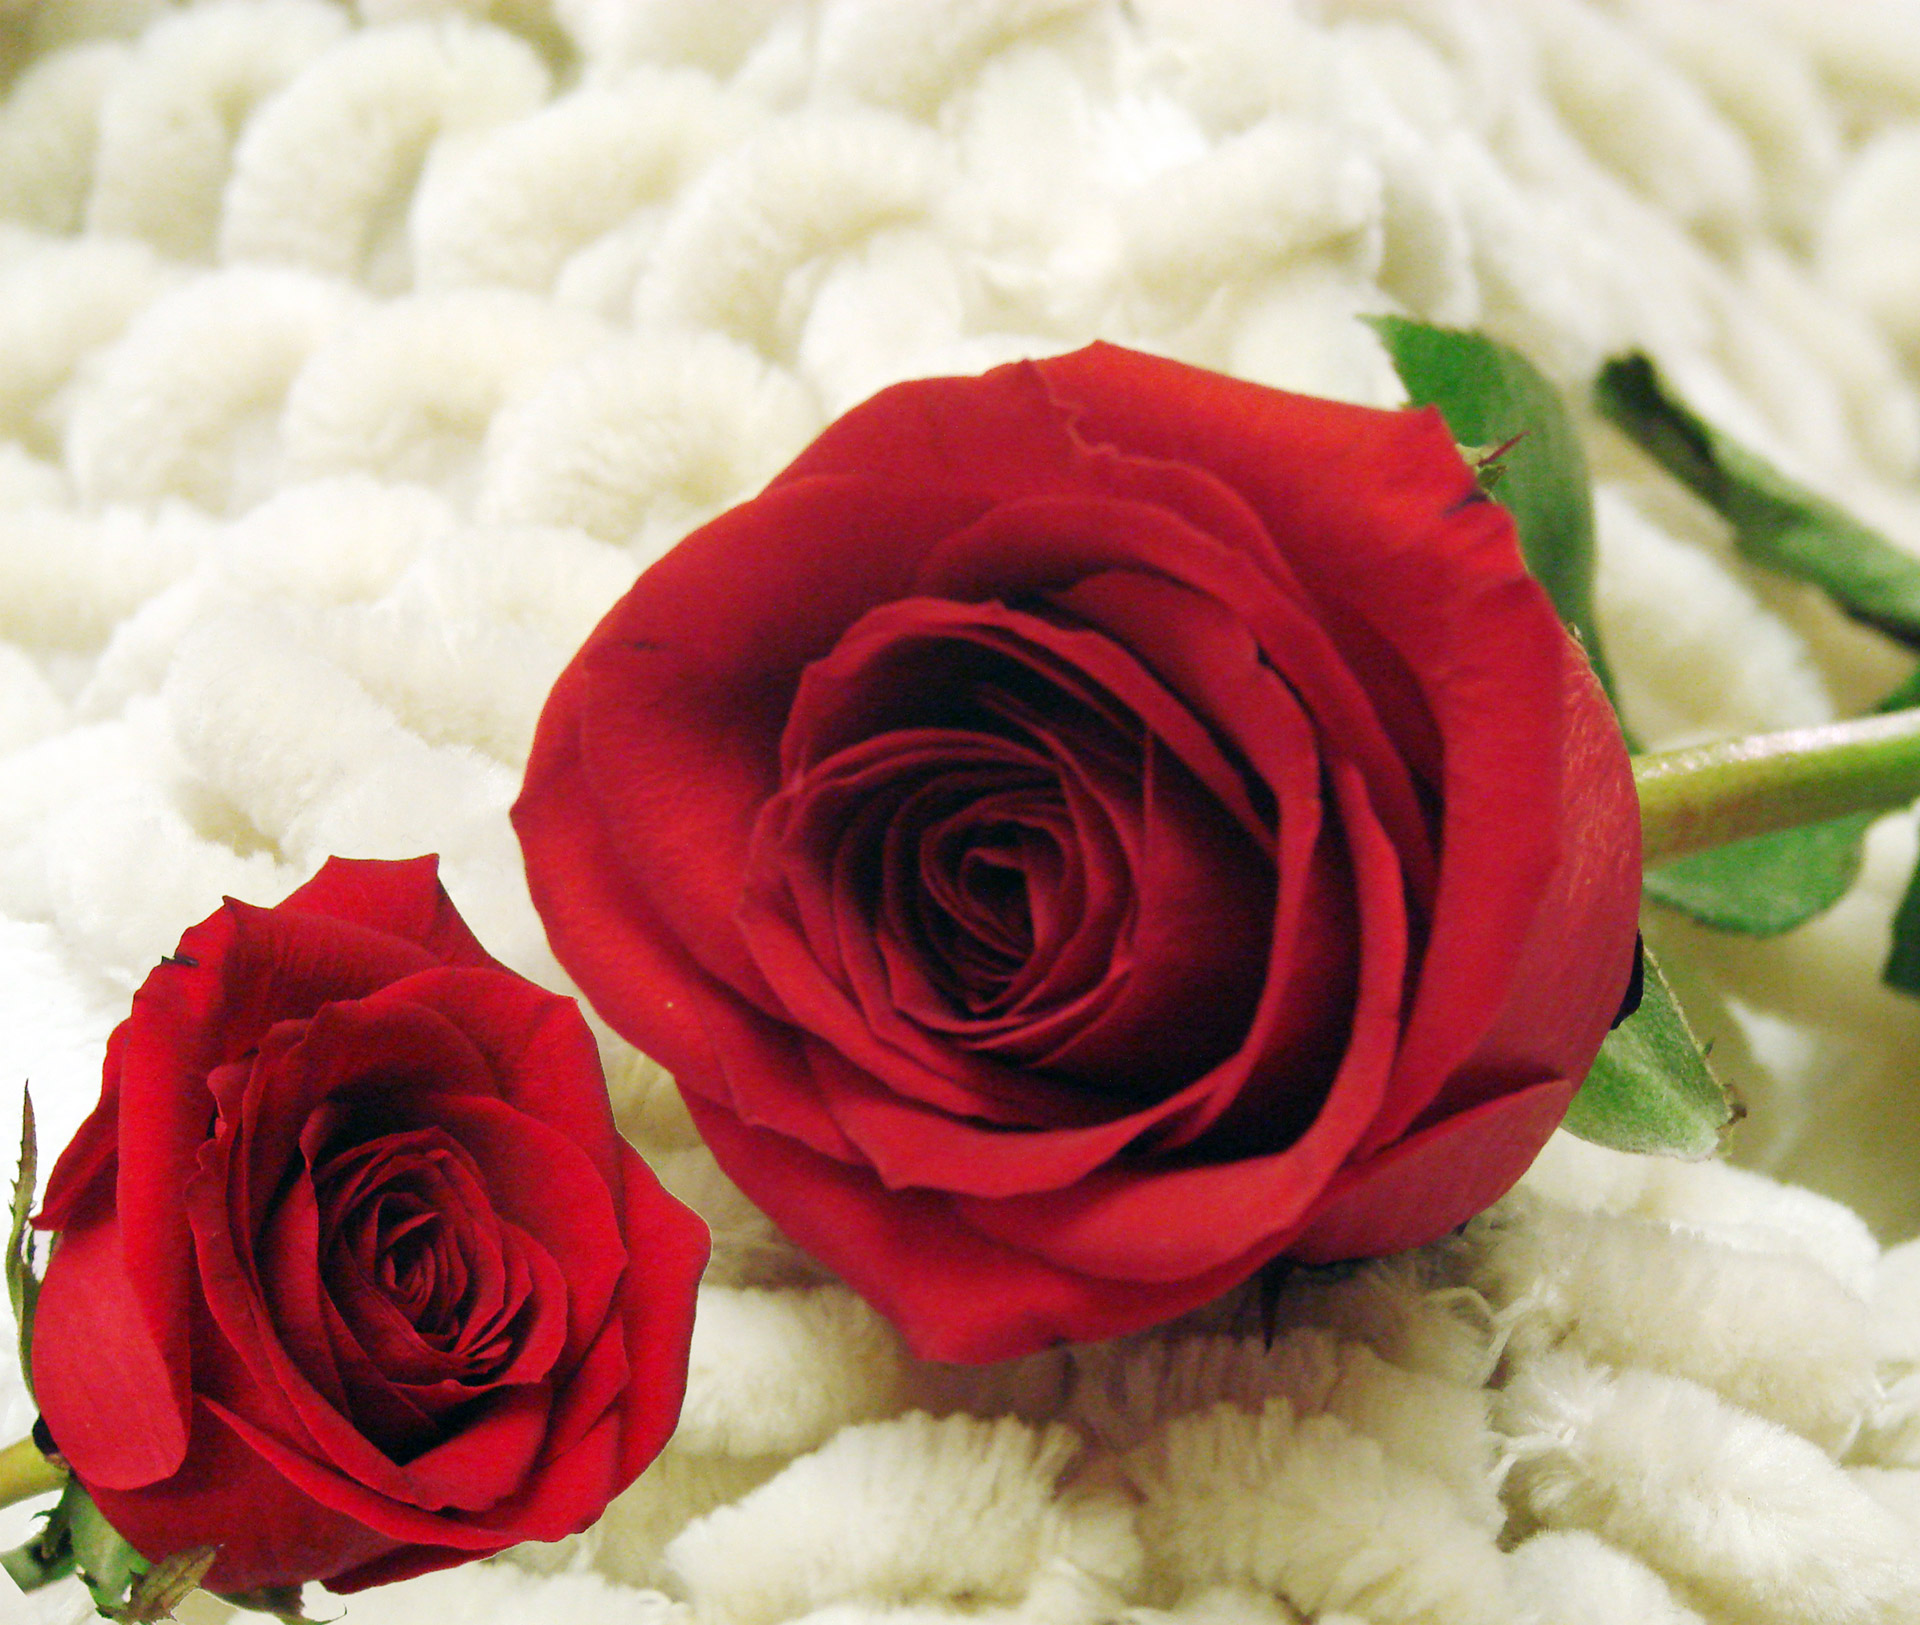 Two red roses on a creamy white background.